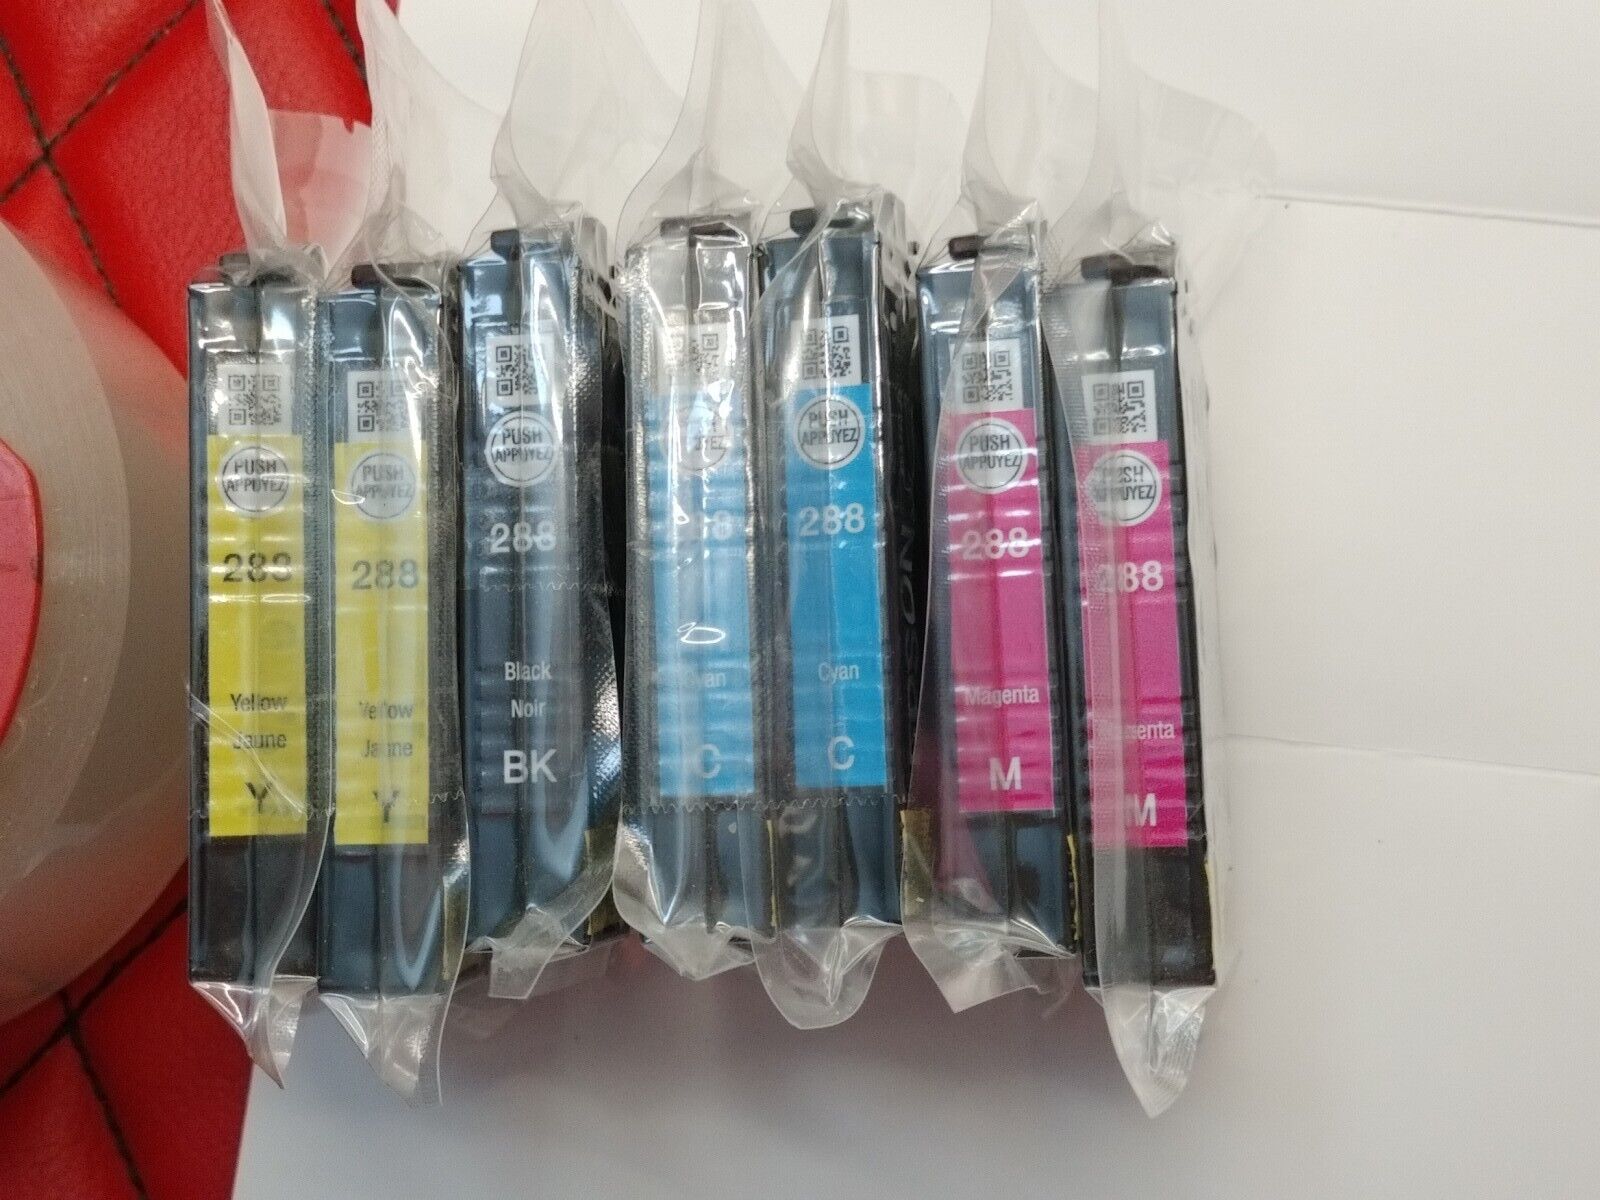 EPSON DURA Brite Ultra Ink Replacement Cartridges Lot (7) 288 New Old-Stock*Bl